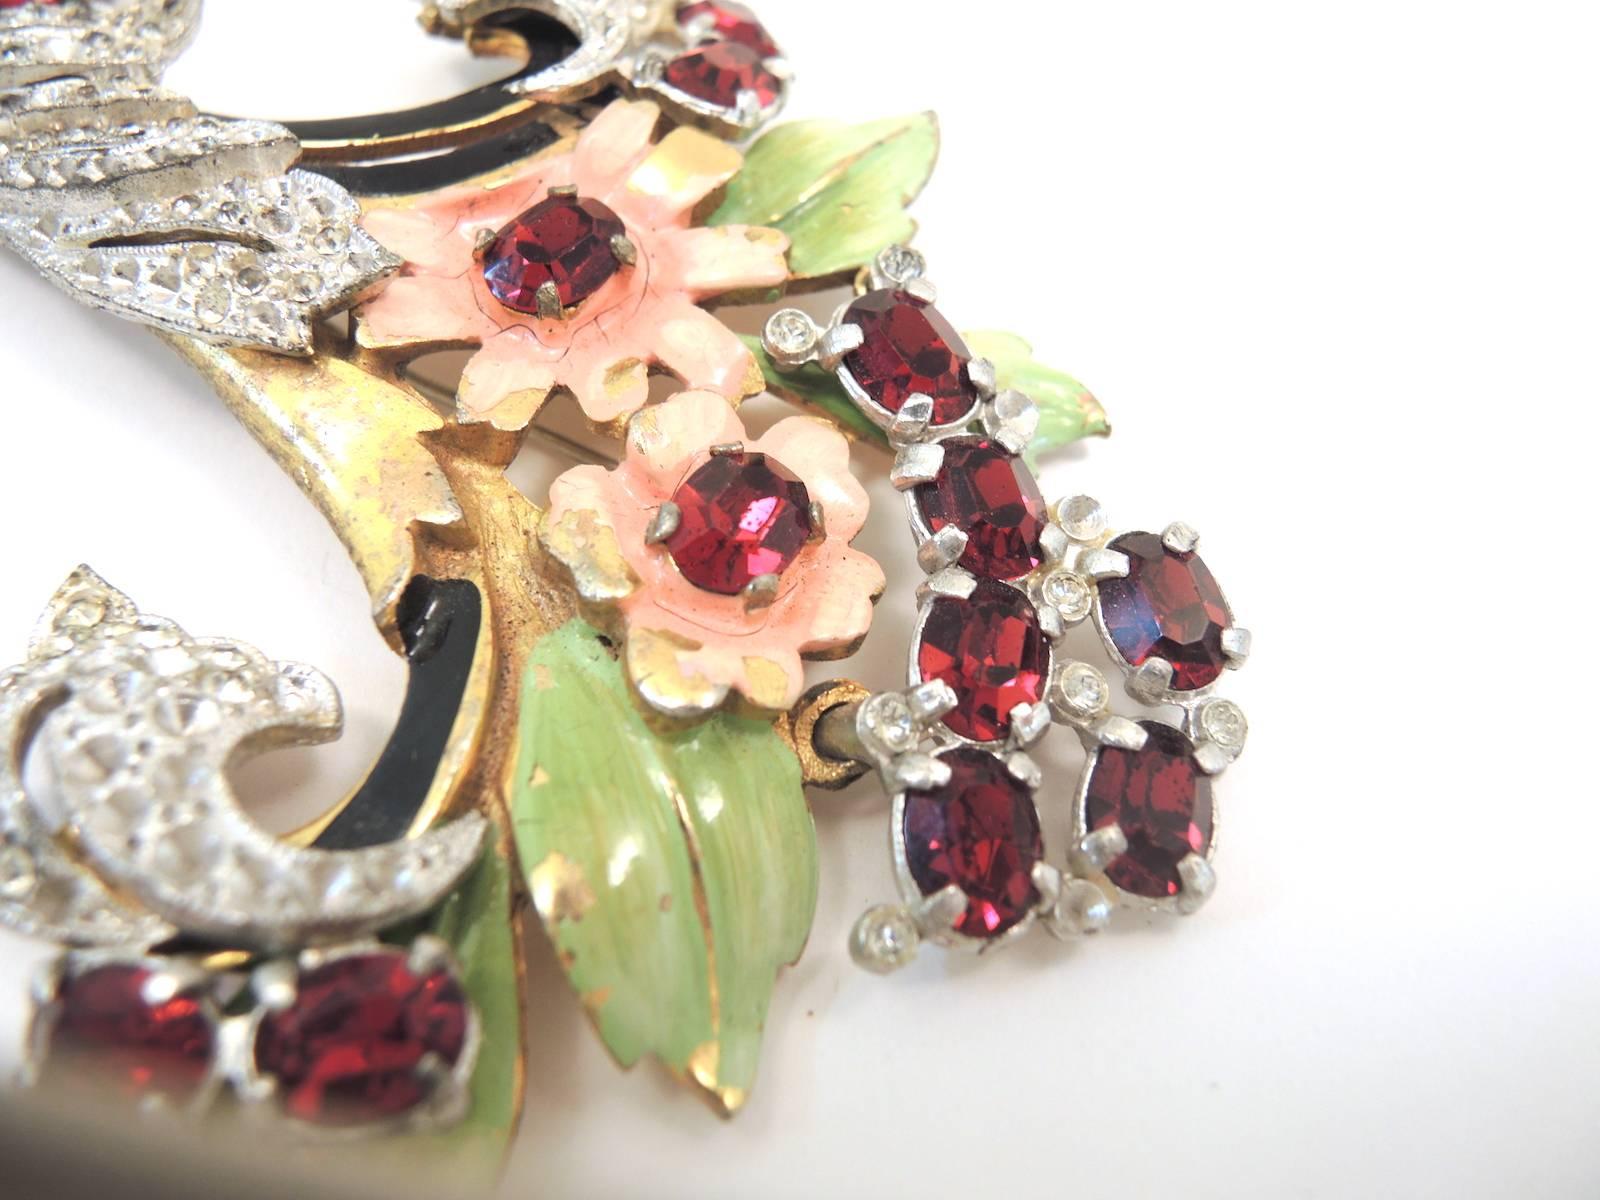 This cornucopia brooch is sprouting out pink enamel flowers centered with round red rhinestones and green enamel leaves with red rhinestone spray on top. The cornucopia is encrusted with clear rhinestone and accented with red rhinestones. It was has